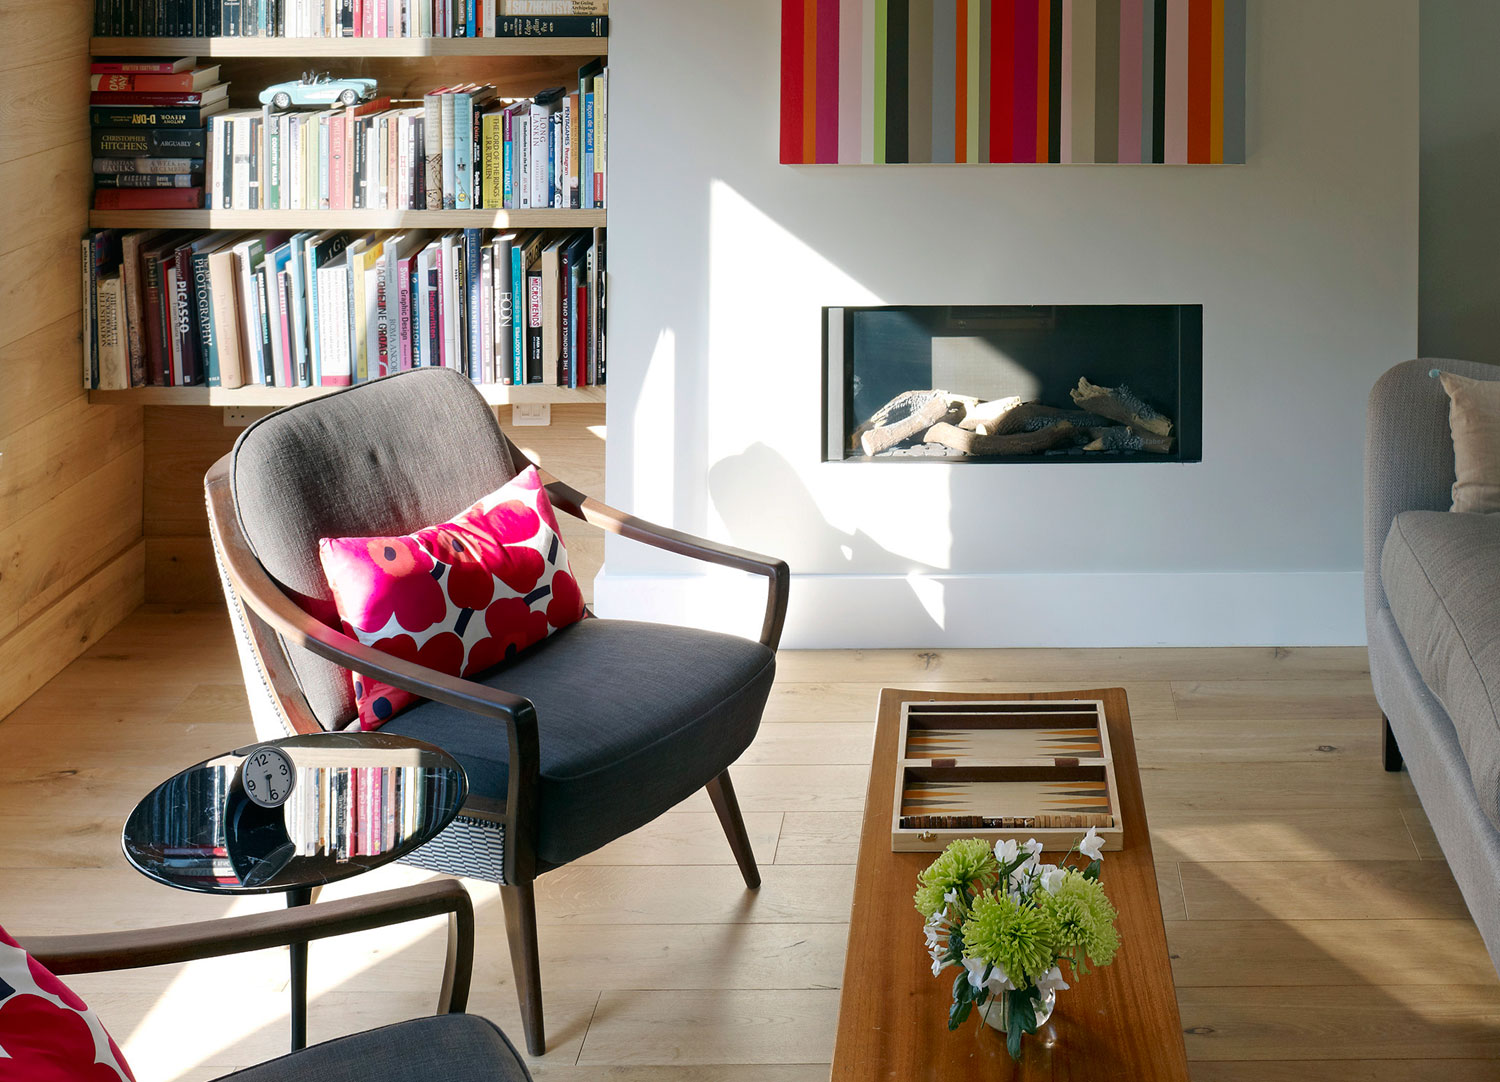 Jill Scholes Interior design, mews house sitting room with fire place and book shelves